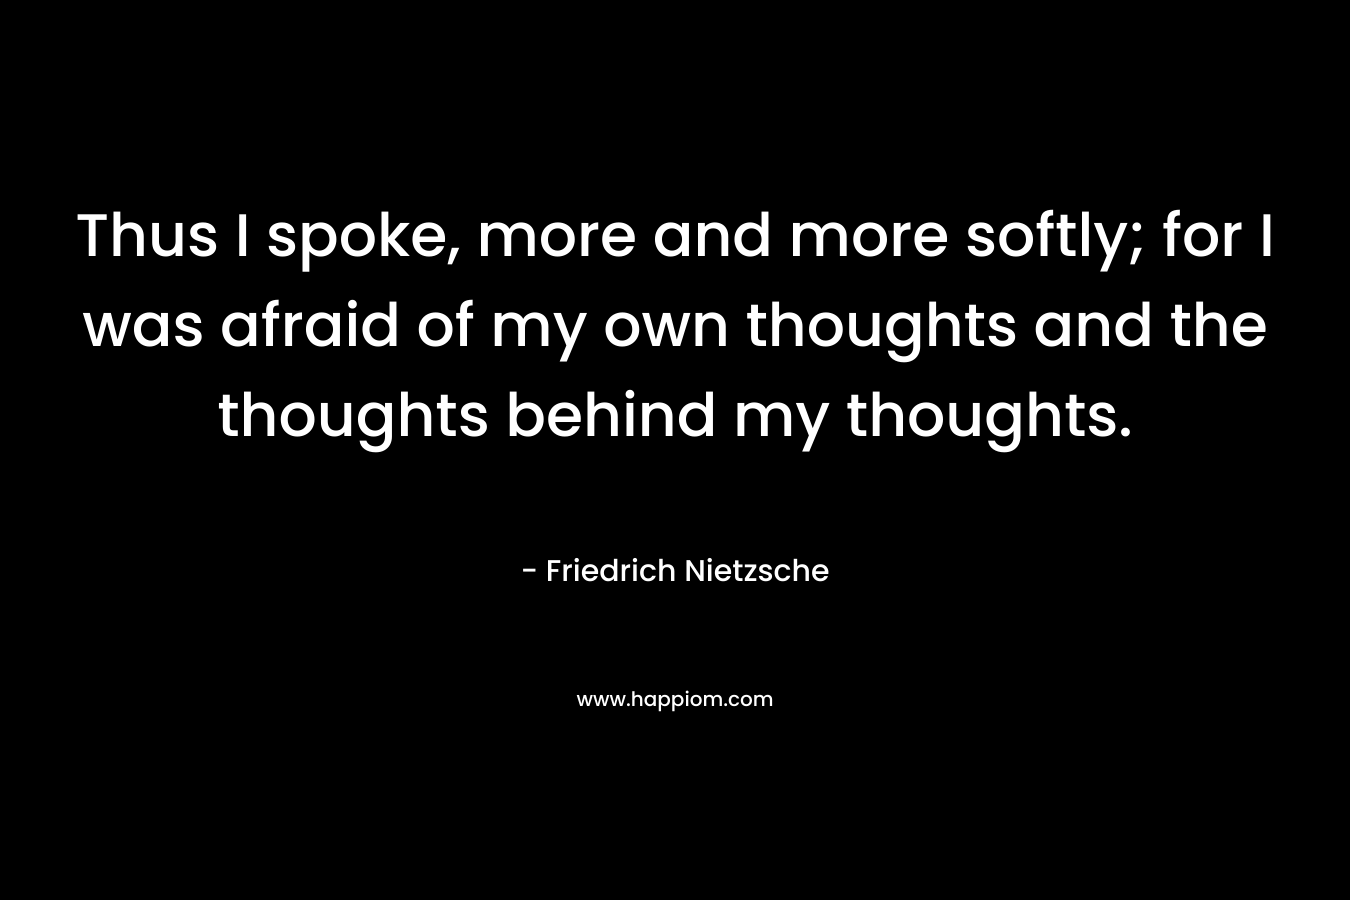 Thus I spoke, more and more softly; for I was afraid of my own thoughts and the thoughts behind my thoughts.